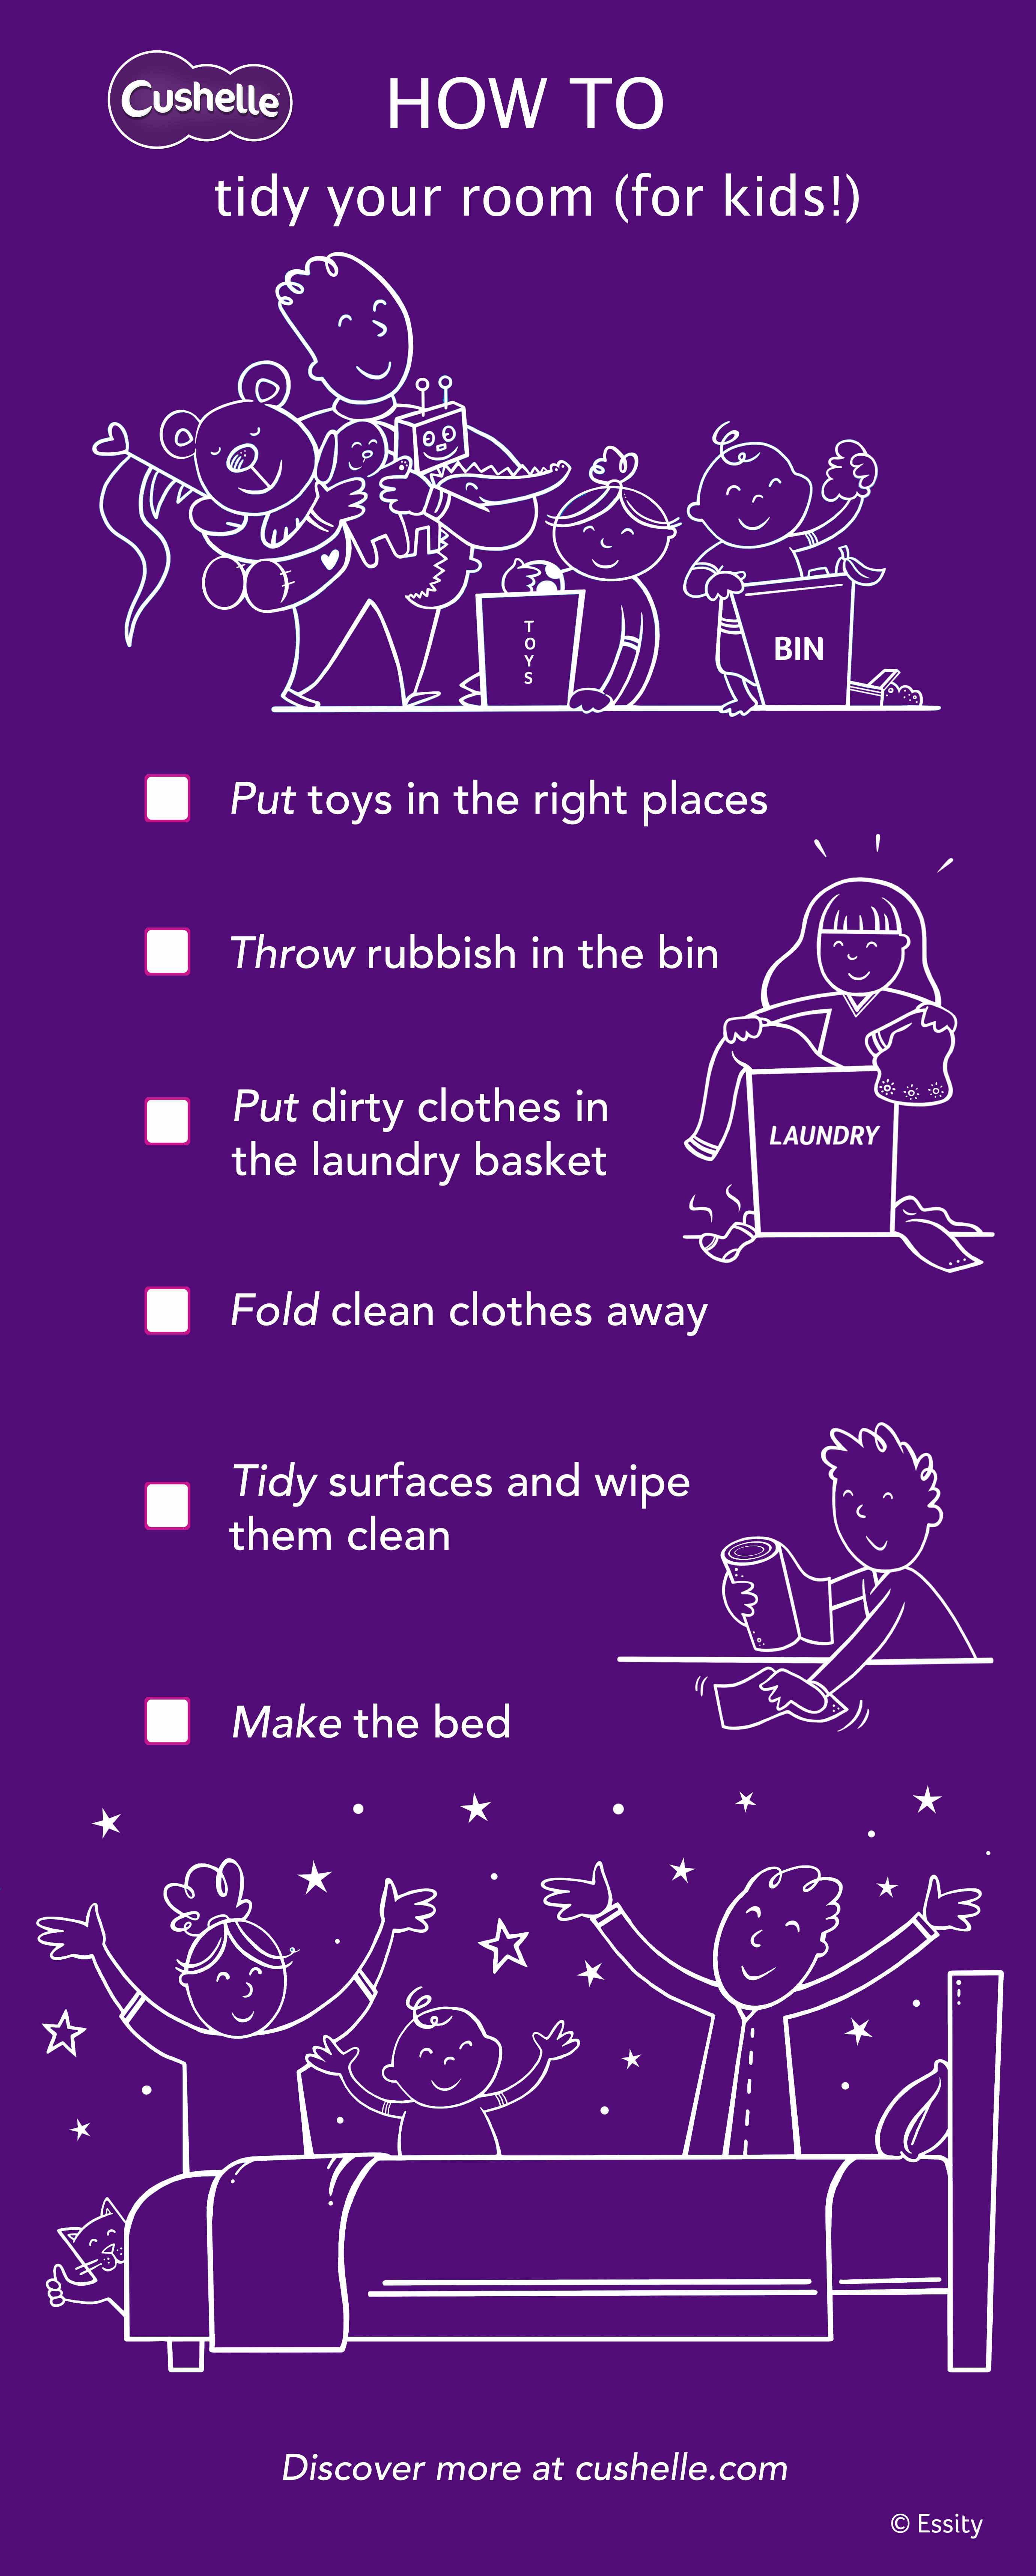 How To Tidy Your Room Top Tips For A Tidy Room Cushelle Cushelle